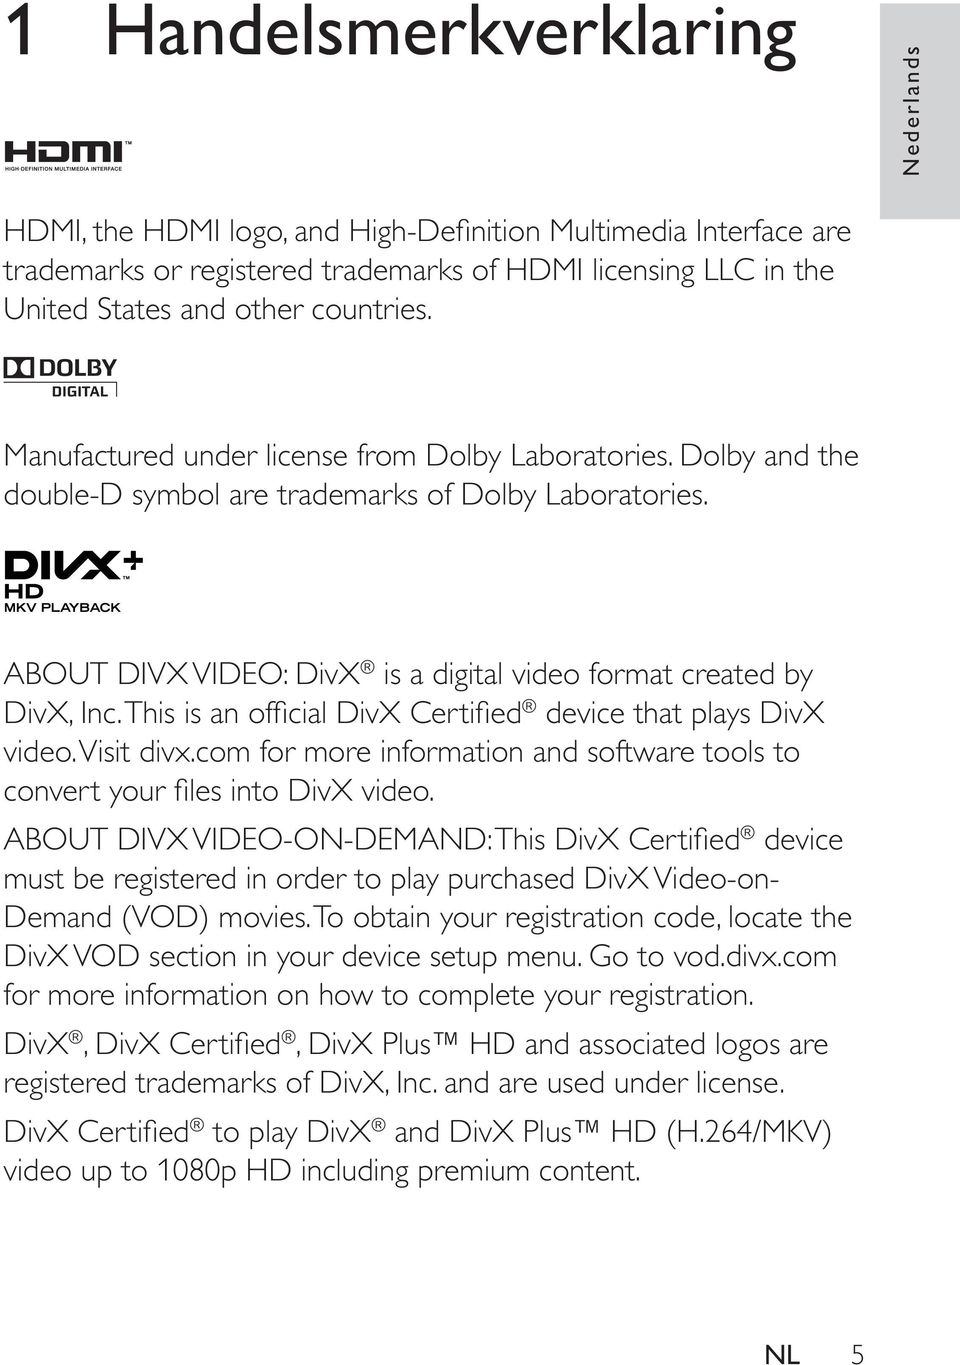 This is an official DivX Certified device that plays DivX video. Visit divx.com for more information and software tools to convert your files into DivX video.